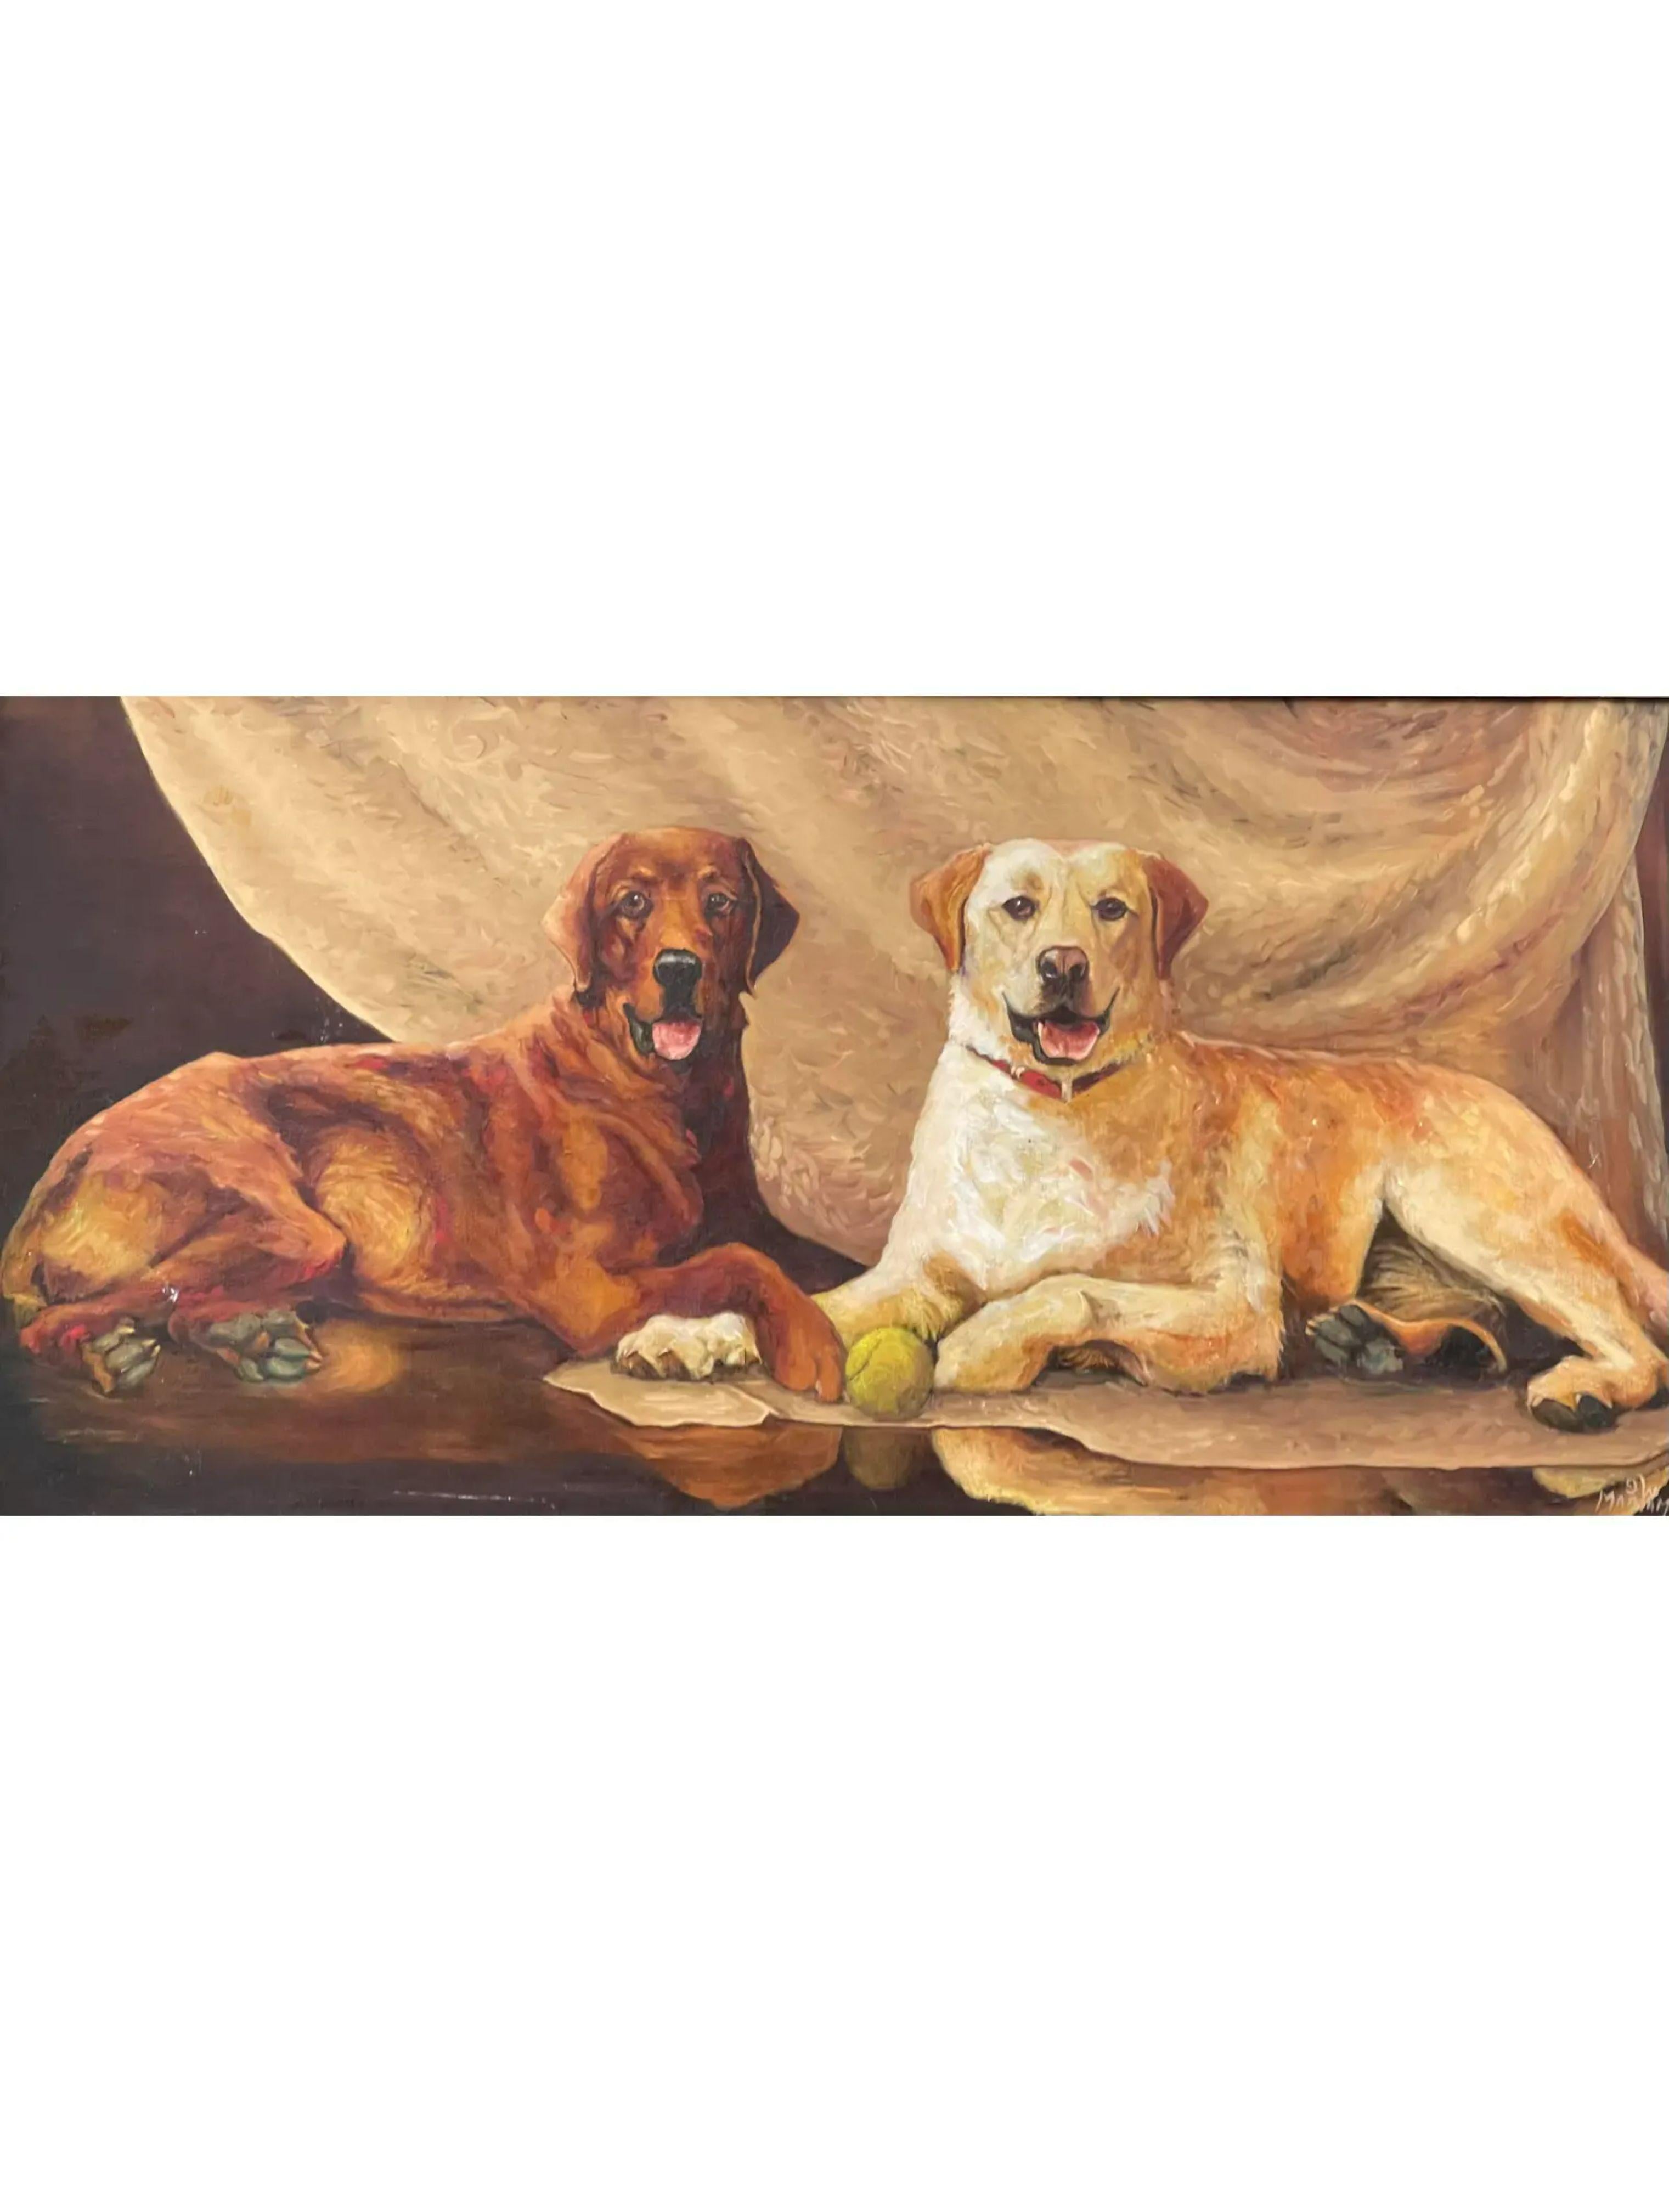 Vintage Original Oil Painting of 2 Labrador Dogs. Featuring a pair of recumbent yellow and chocolate labs. Well painted, frame marked Markcum Graffiti..

Additional information: 
Materials: Oil Paint
Color: Sienna
Period: 1980s
Art Subjects: